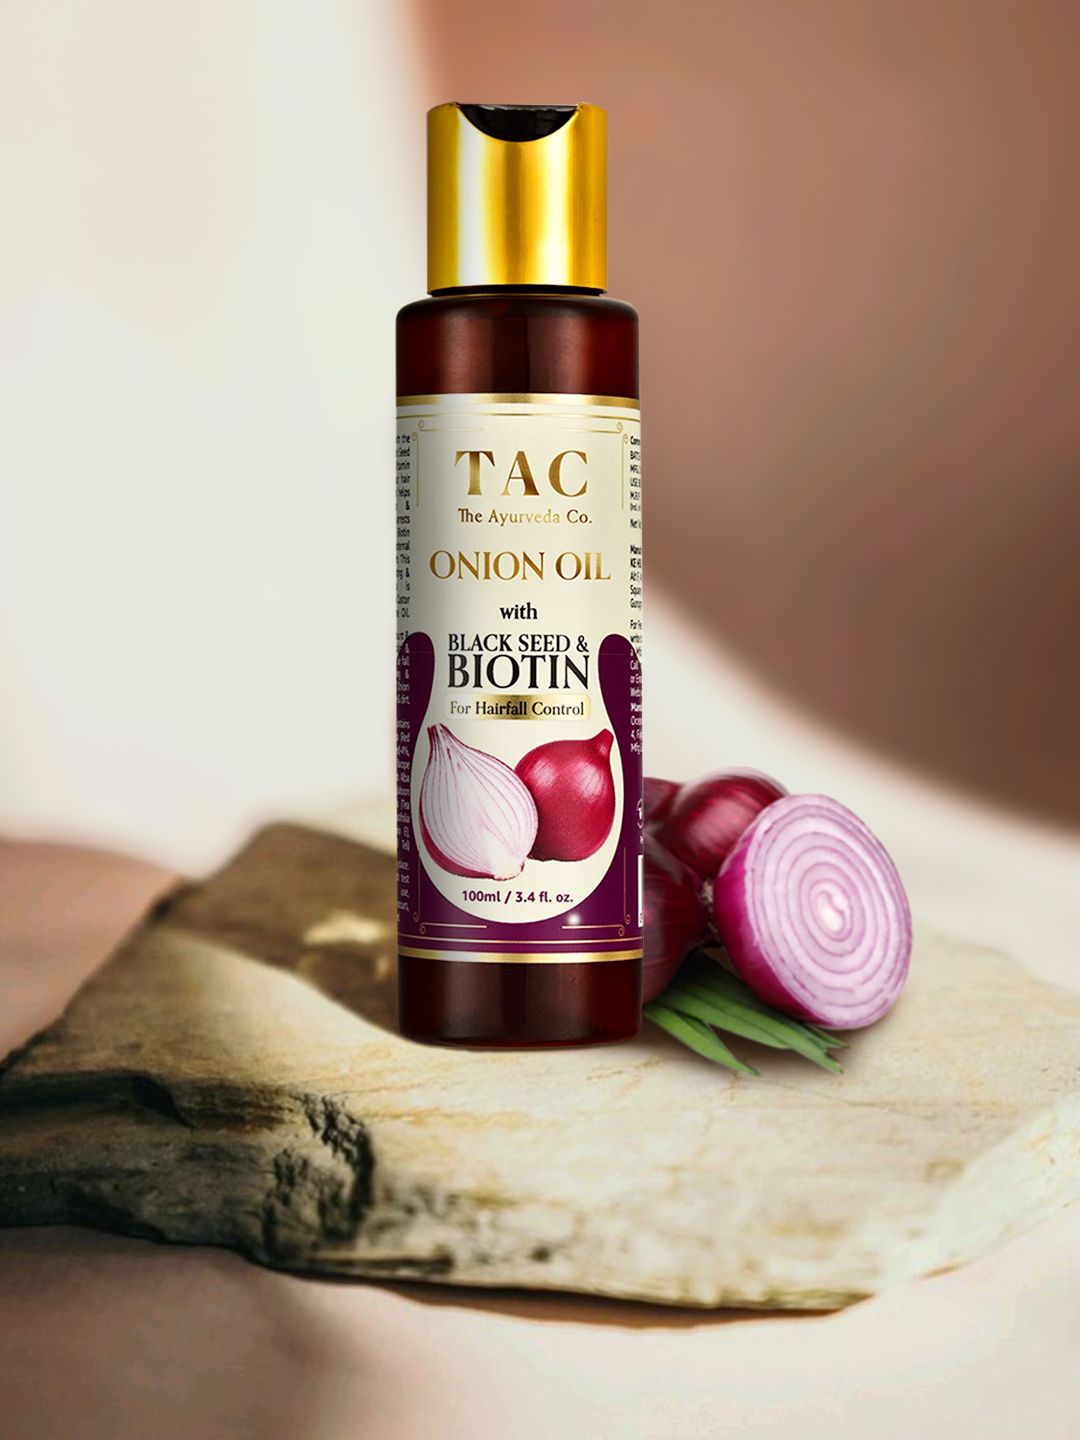 TAC - The Ayurveda Co. Onion with Black Seed and Biotin Hairfall Control Hair Oil 100ml Price in India